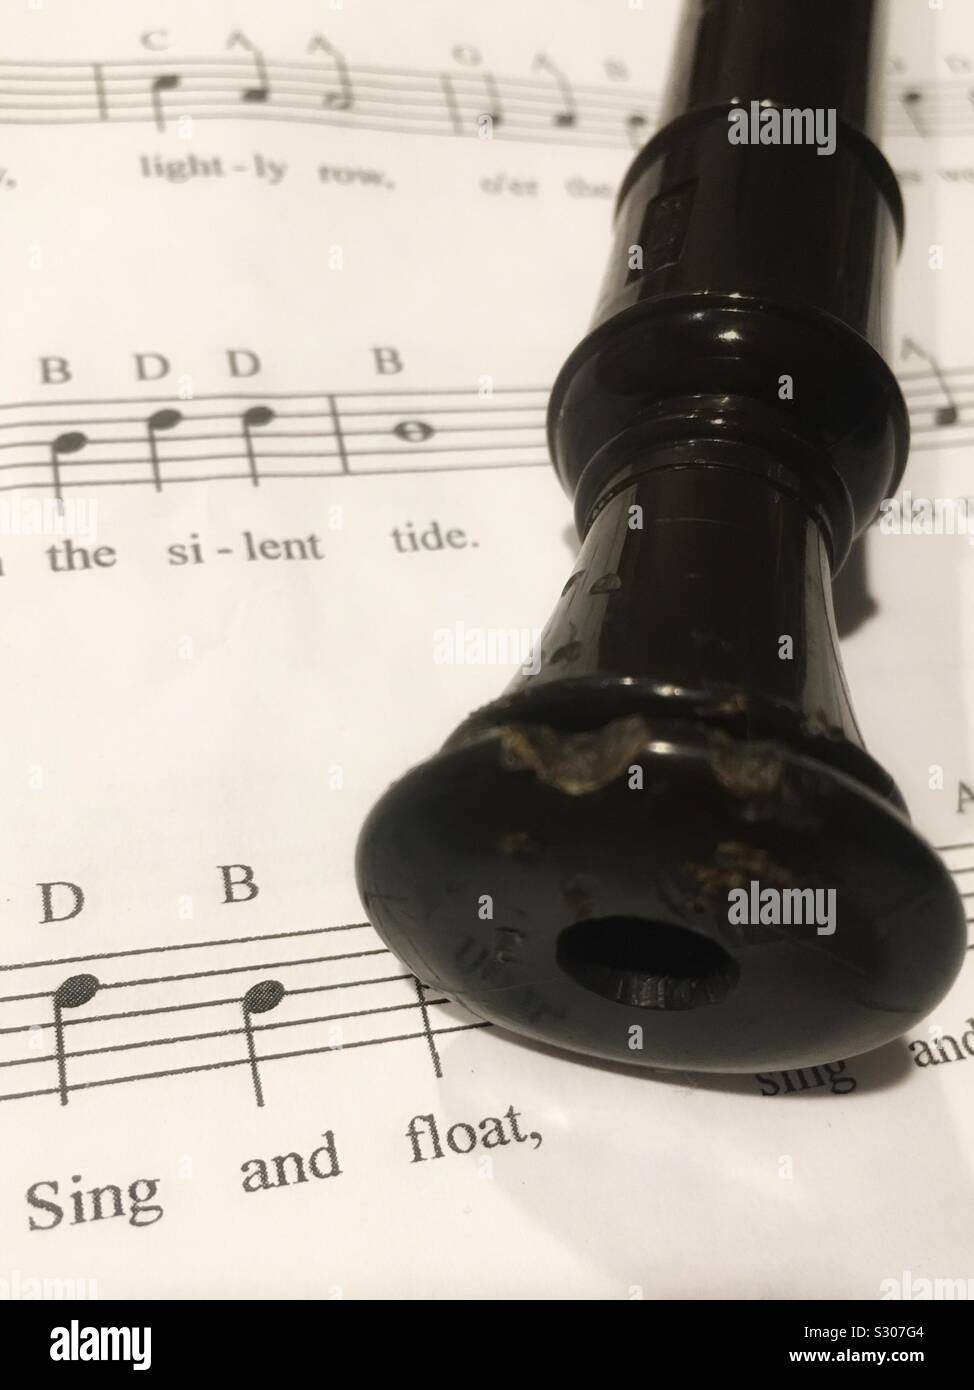 Sing and Float Recorder on Sheet Music Stock Photo